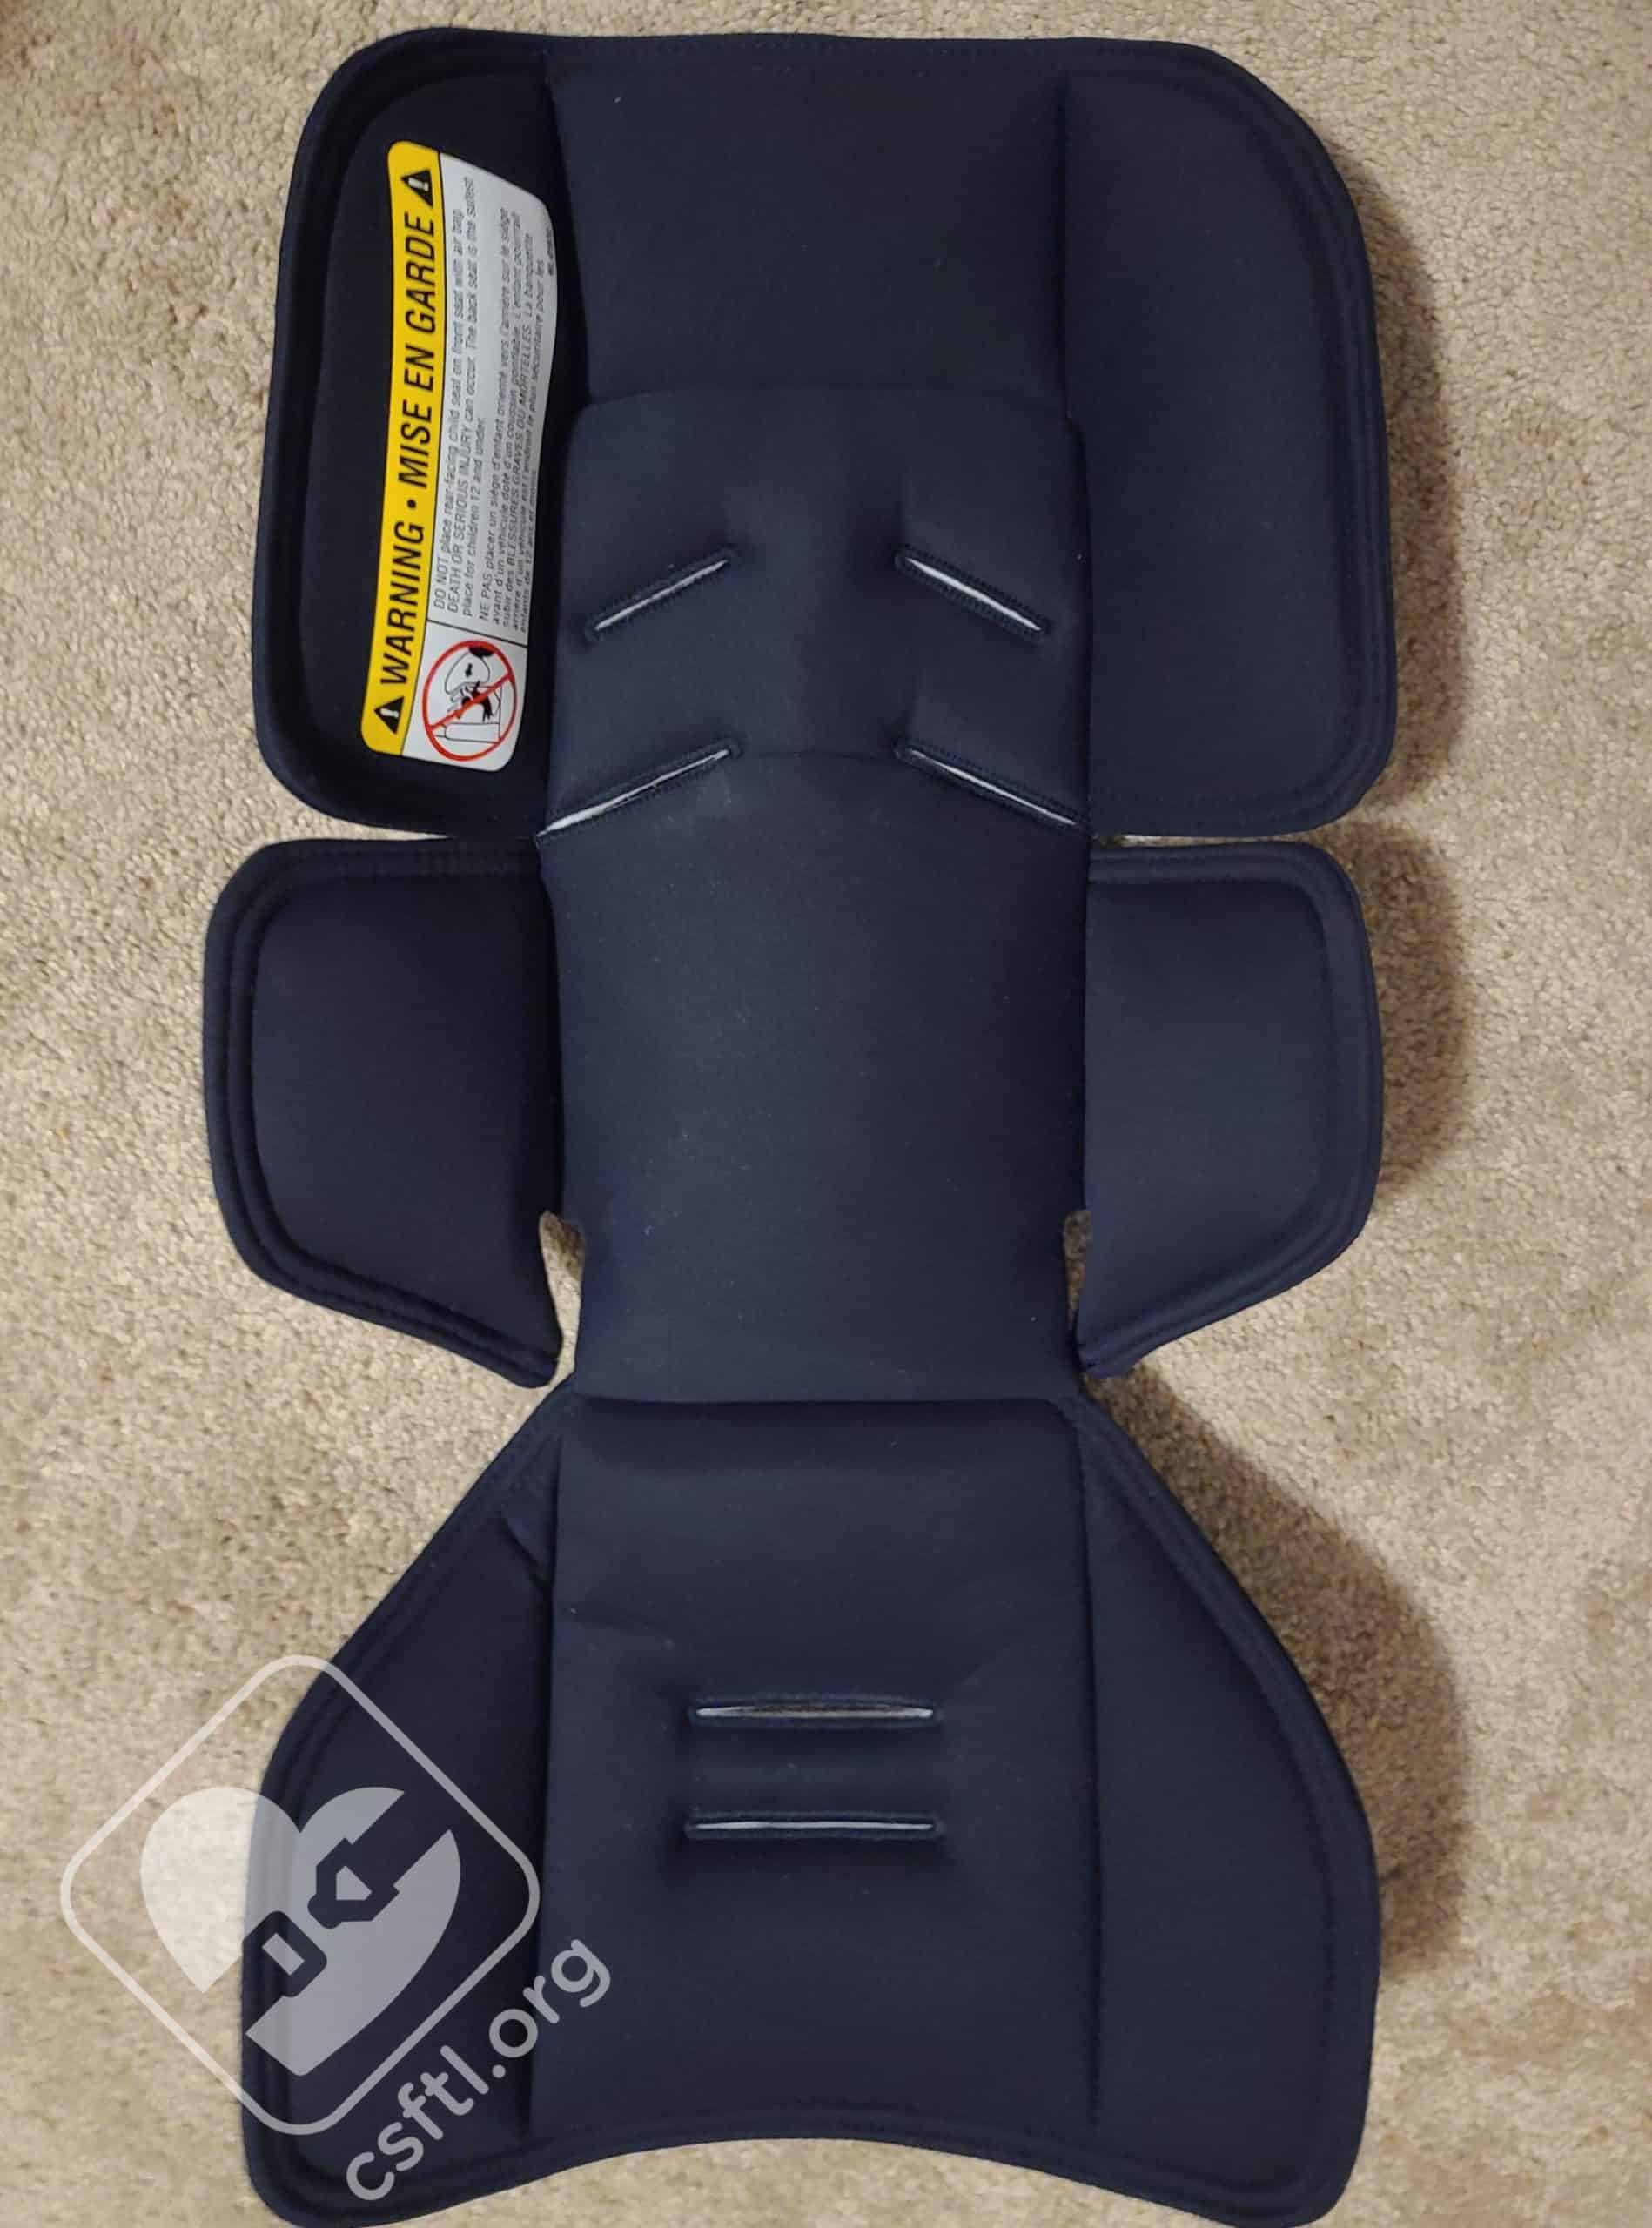 Nuna PIPA Review - Canada - Car Seats For The Littles